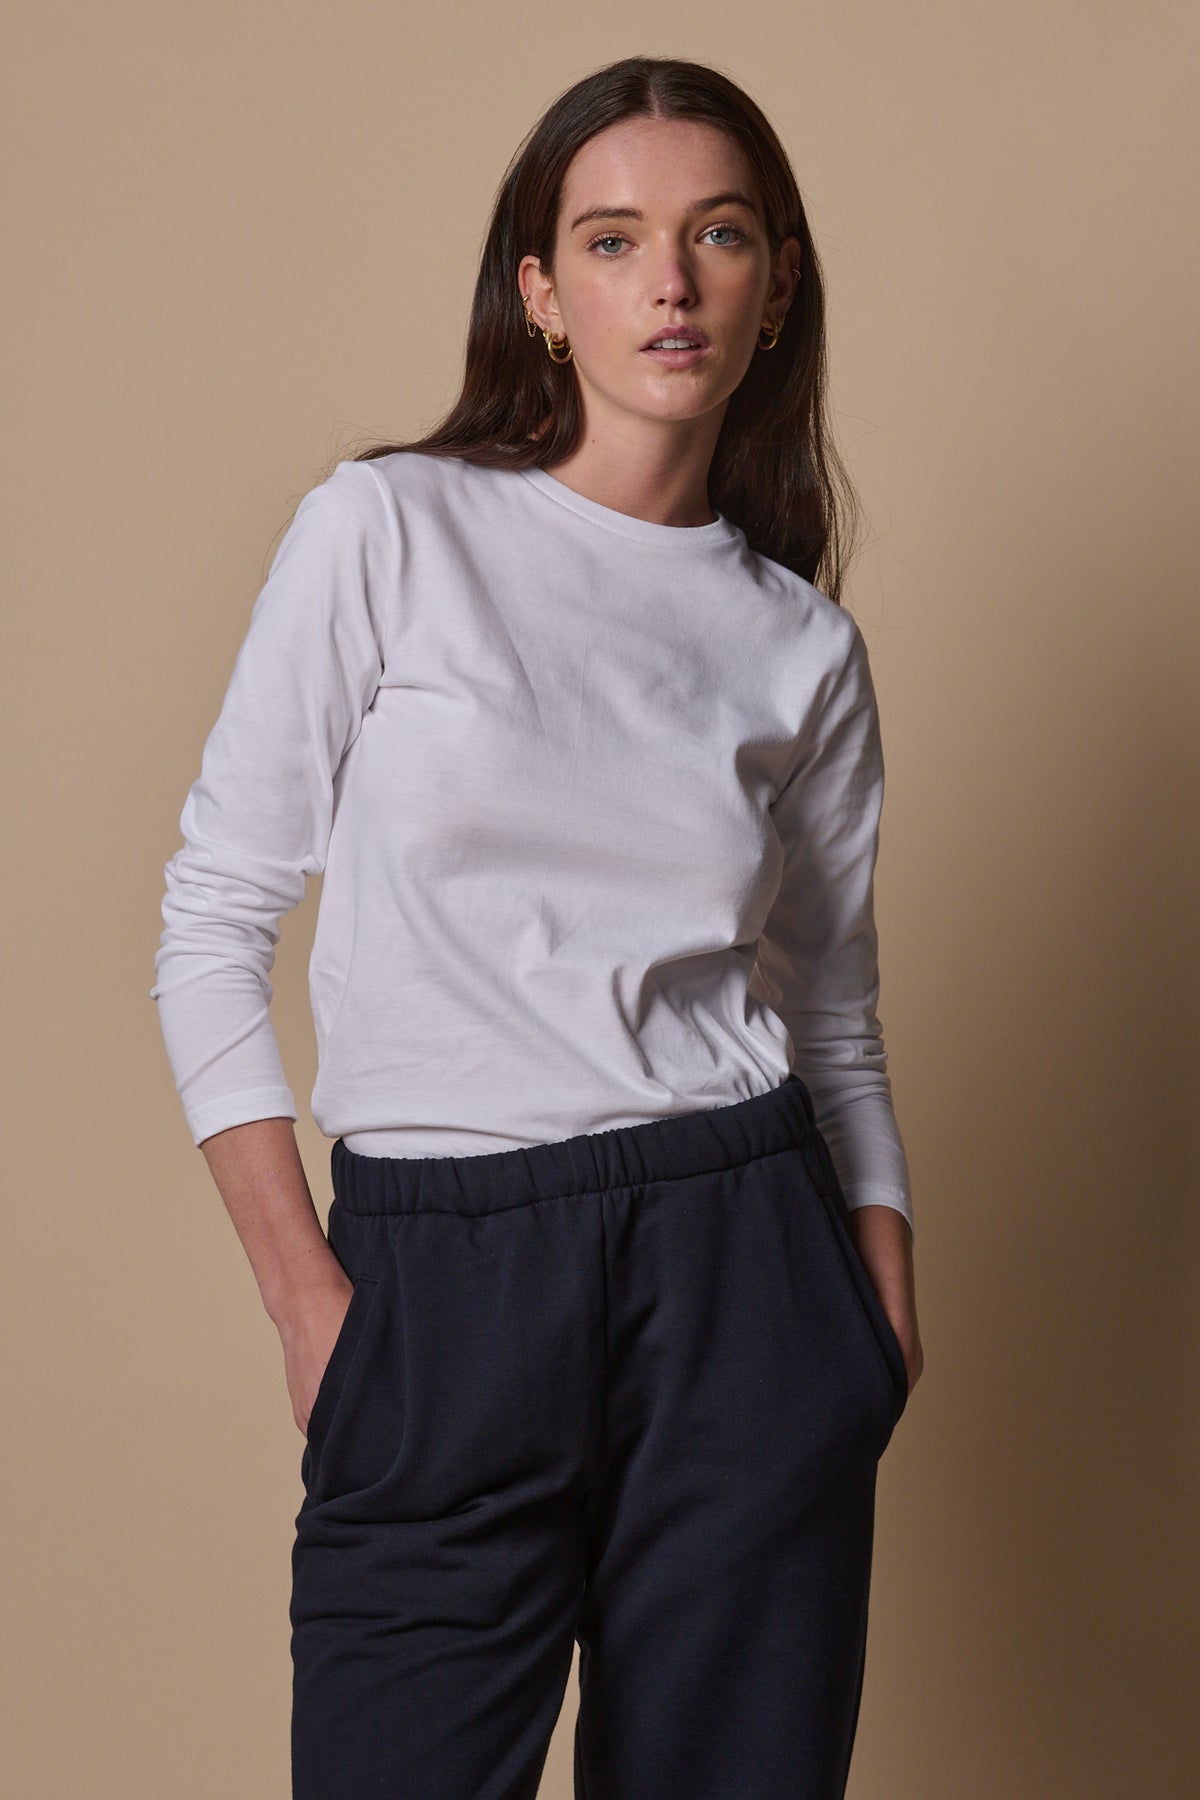 
            Thigh up image of brunette female wearing long sleeve t shirt in white tucked in navy sweatpants with sleeves pushed up to the arms